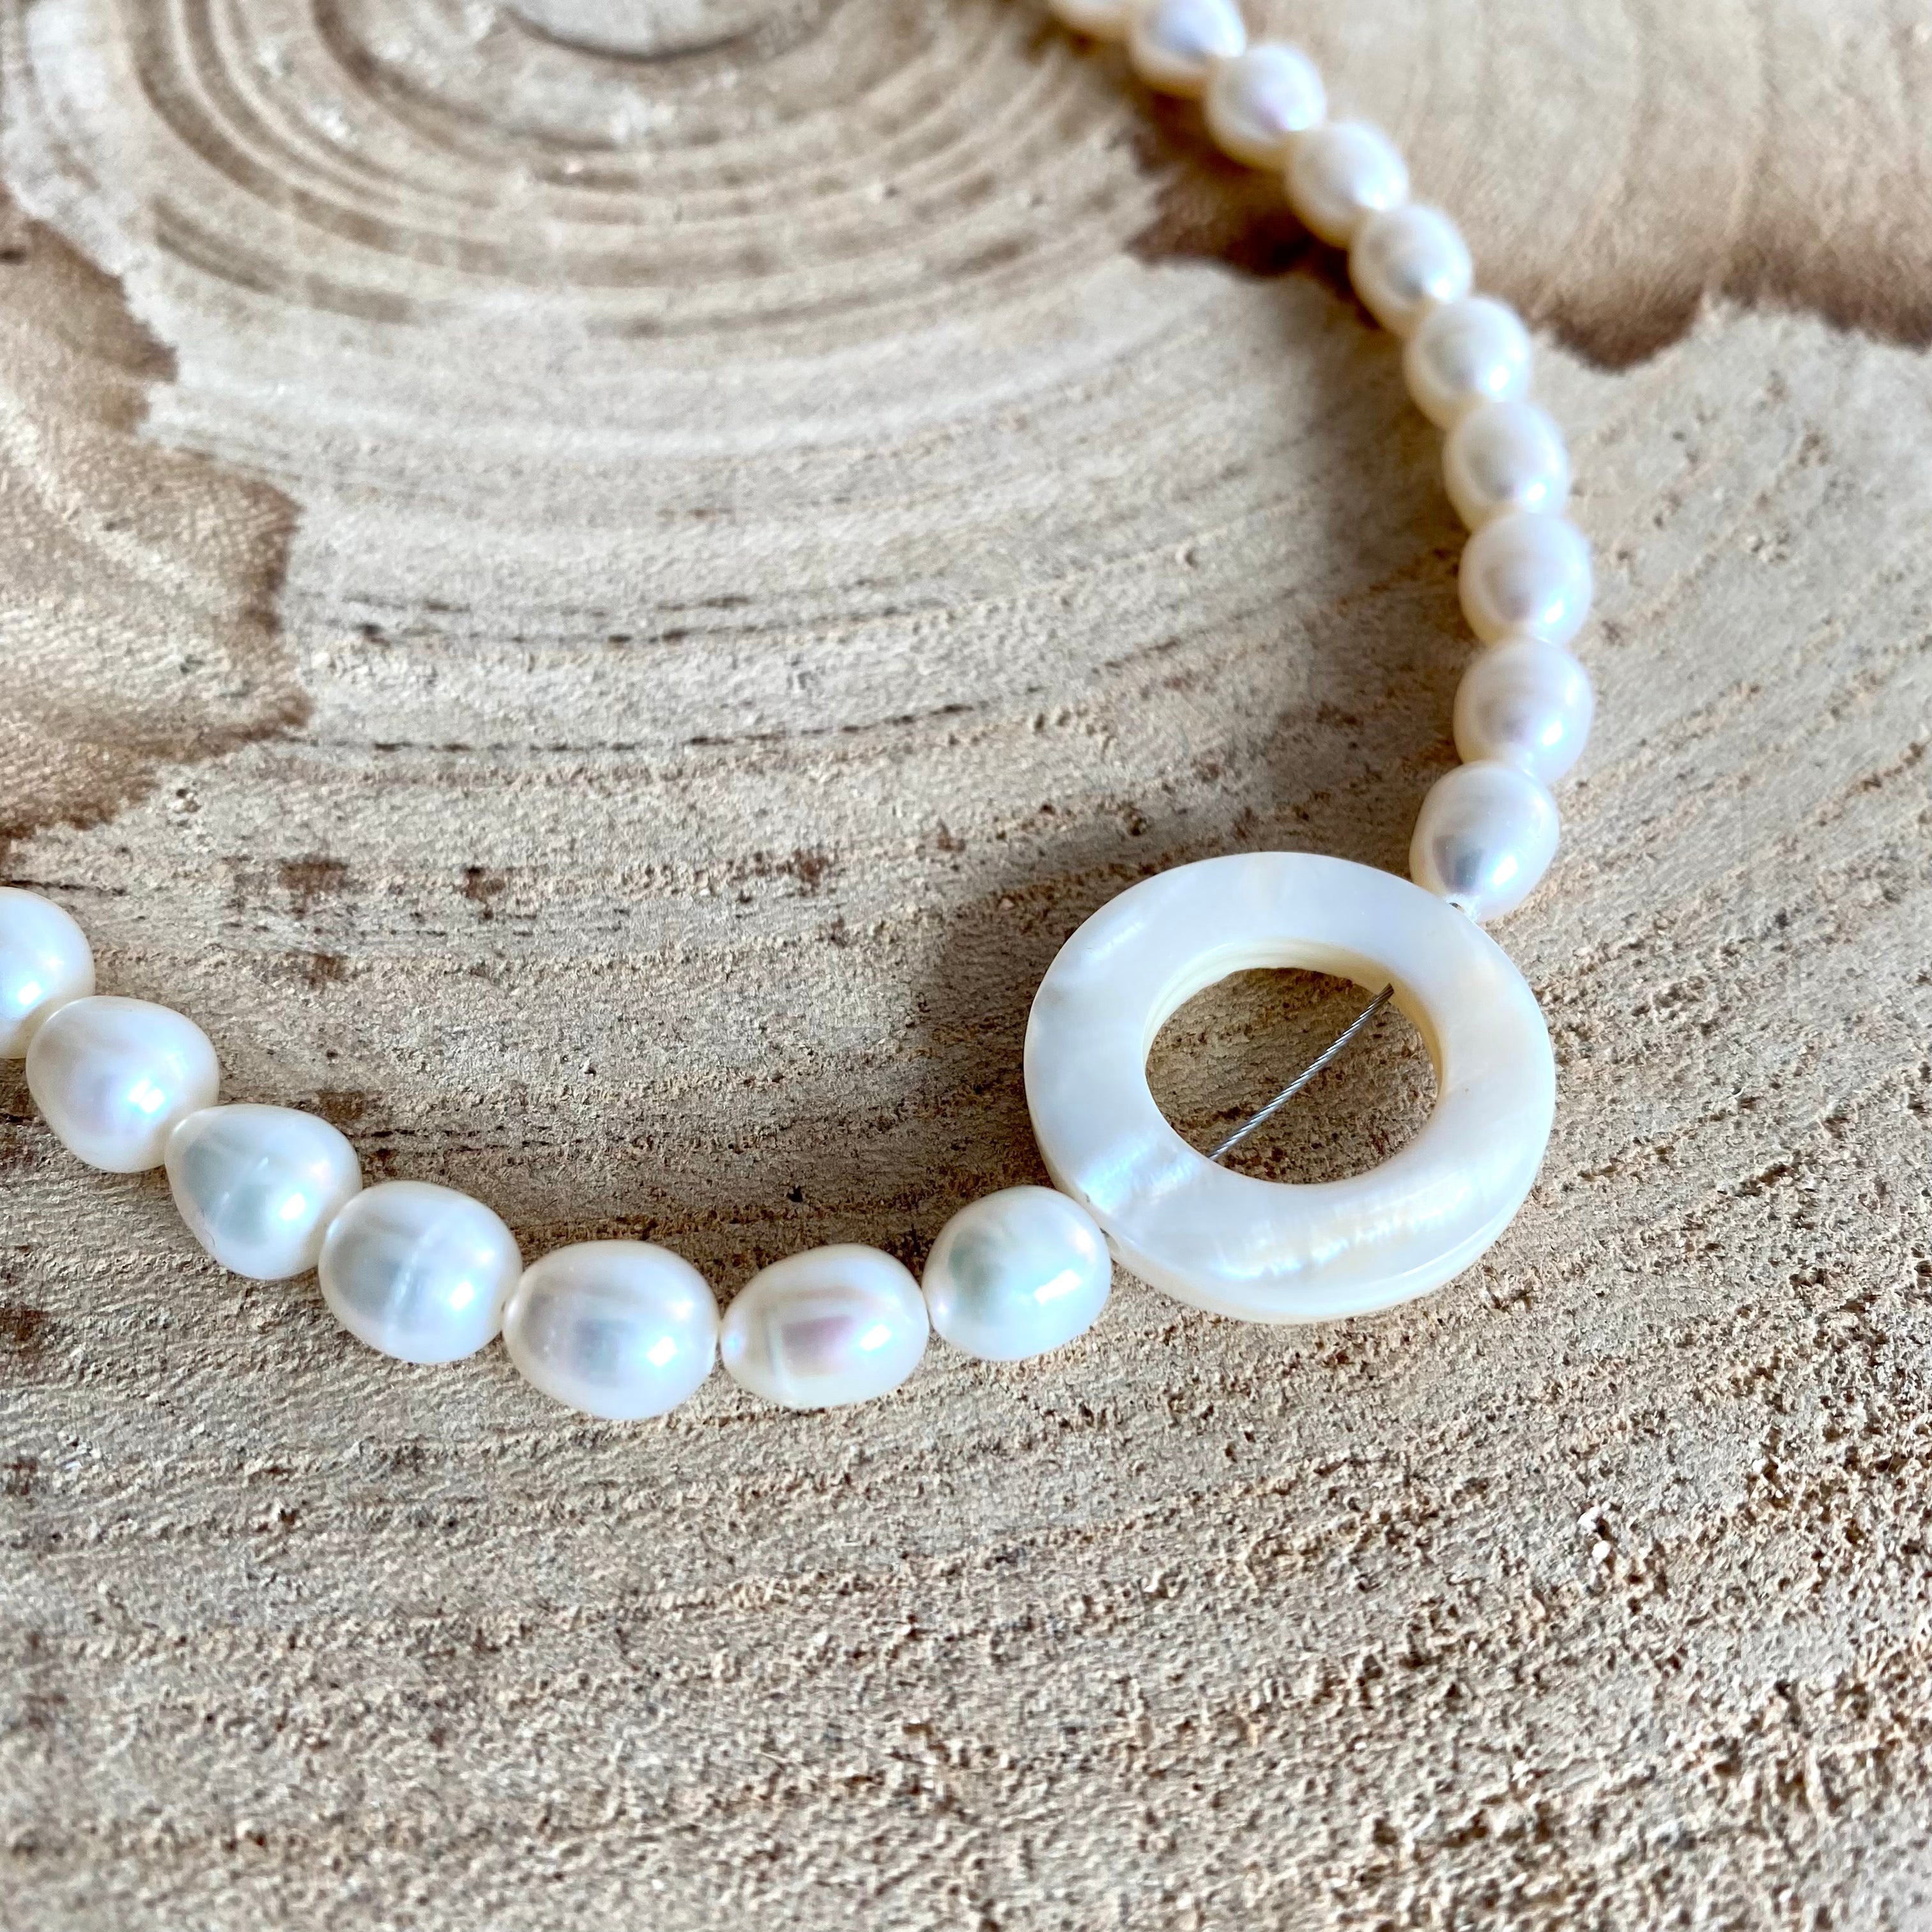 Pearl Collection - Lisa Carney Jewelry Lisa Carney Designs 